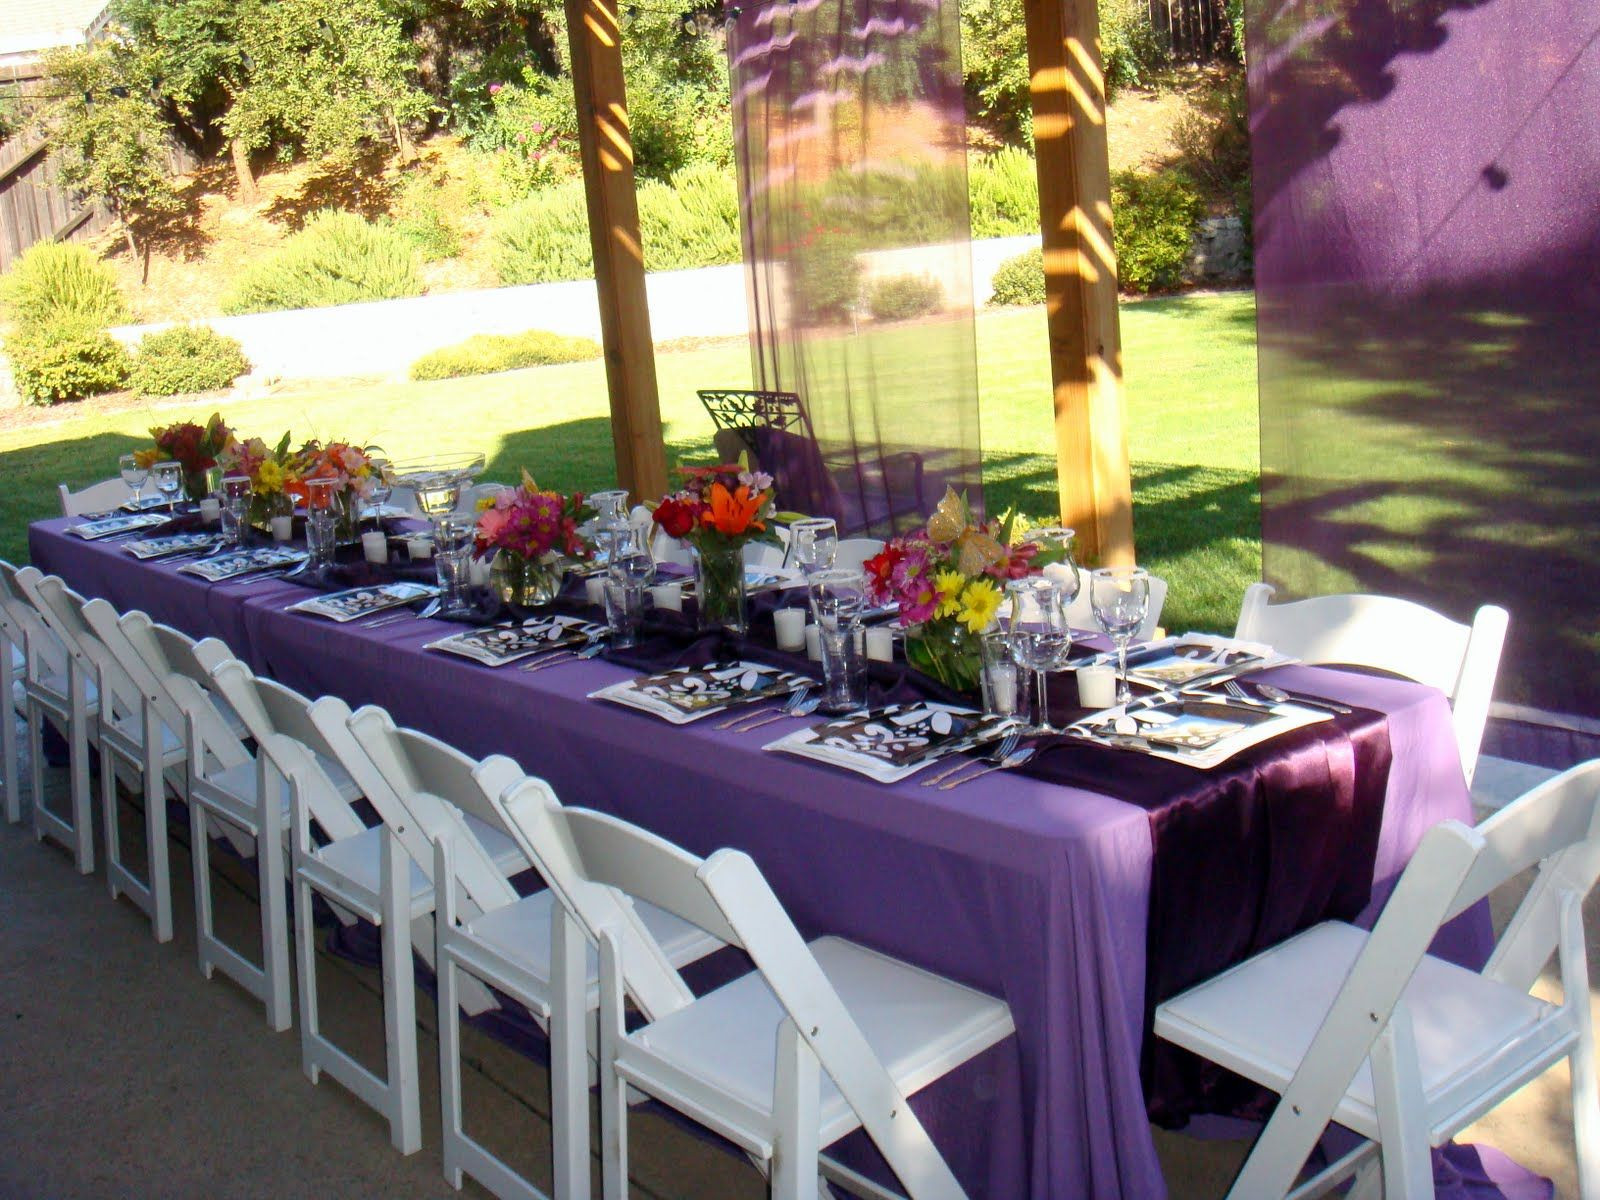 Graduation Small Backyard Party Ideas
 tablescapes for outdoor graduation party